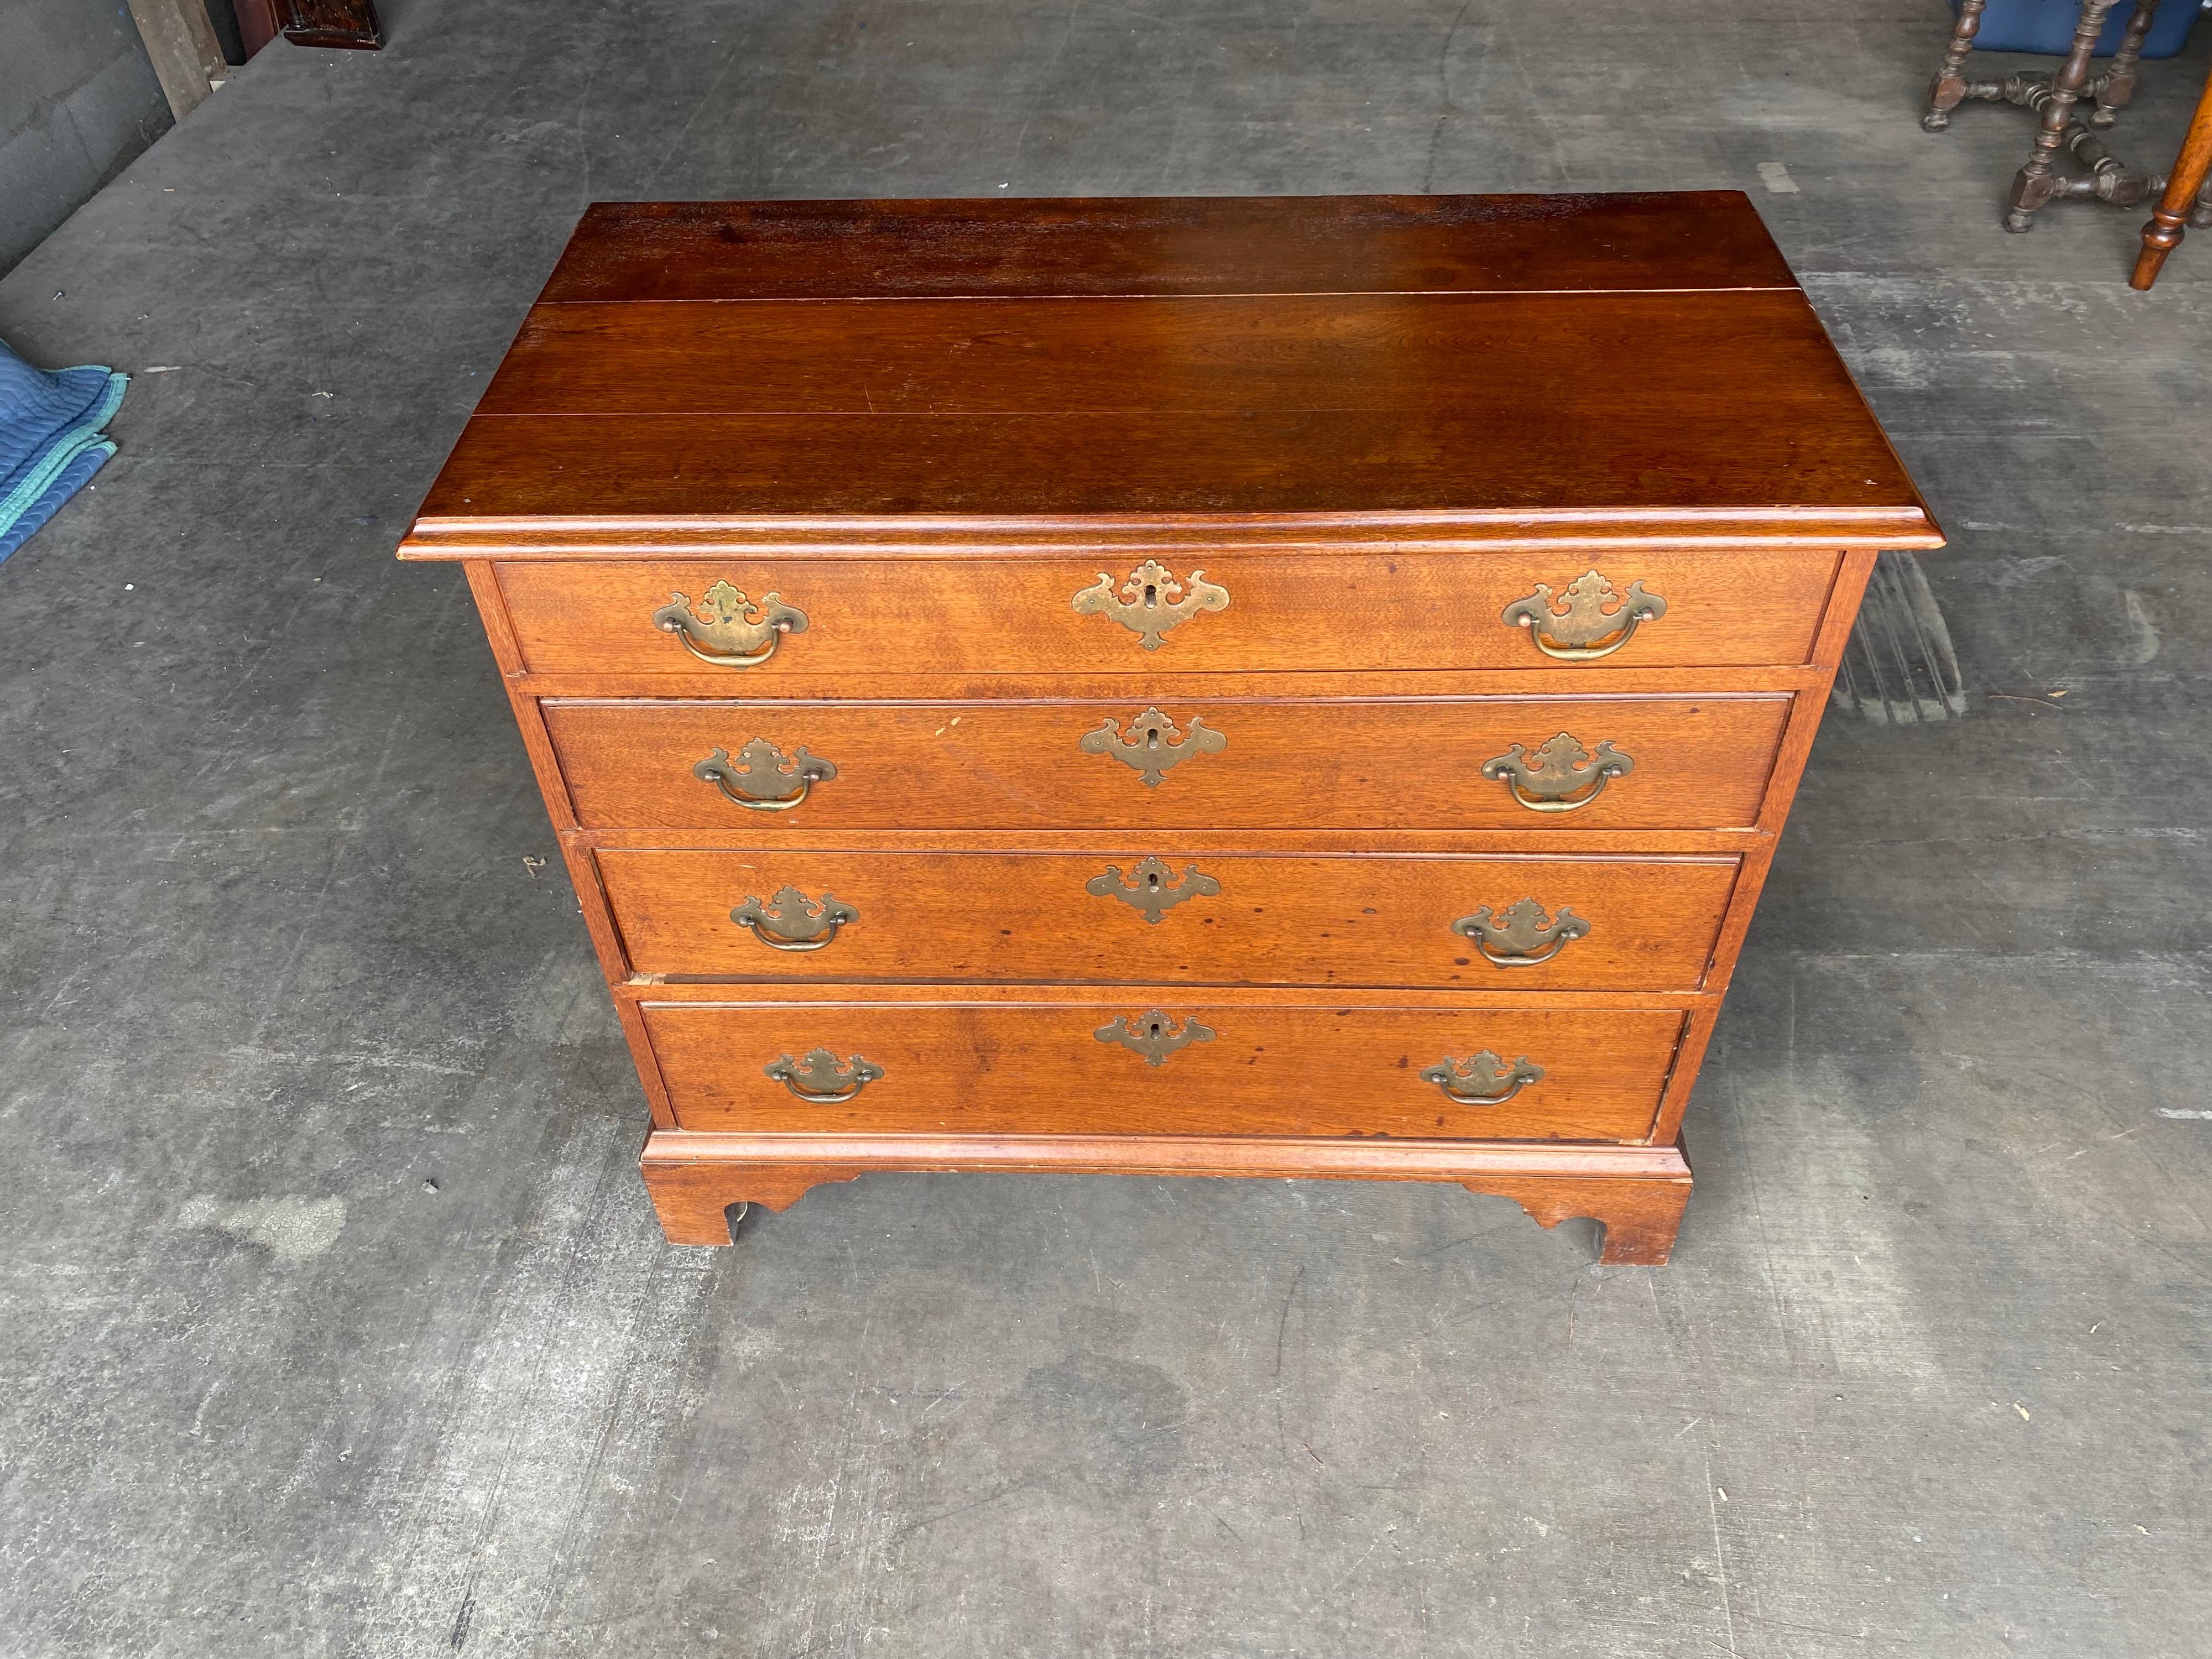 18th century New England mahogany four drawer chest with bracket feet and original hardware. Two board top.